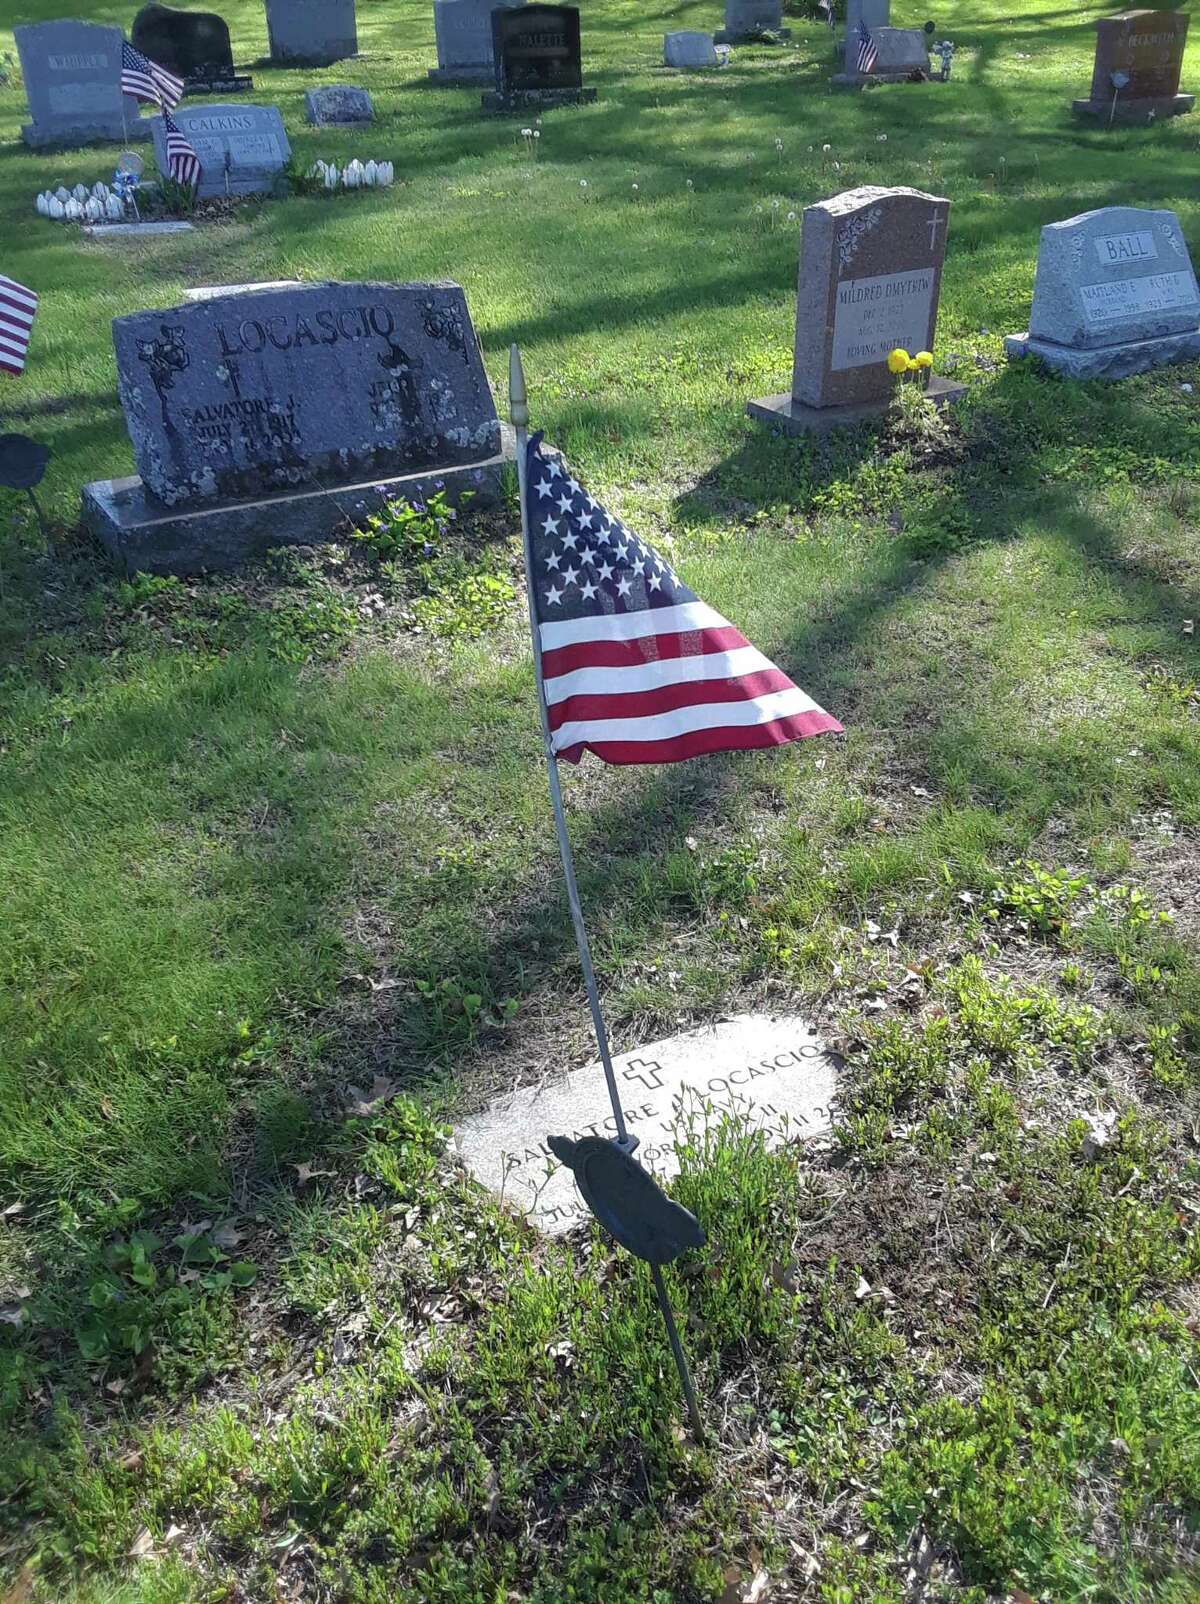 Veterans groups and volunteers spent time in local cemeteries replacing flags on veterans' graves in preparation for Memorial Day. Above, a flag marks a grave at Forest View Cemetery in Winsted.